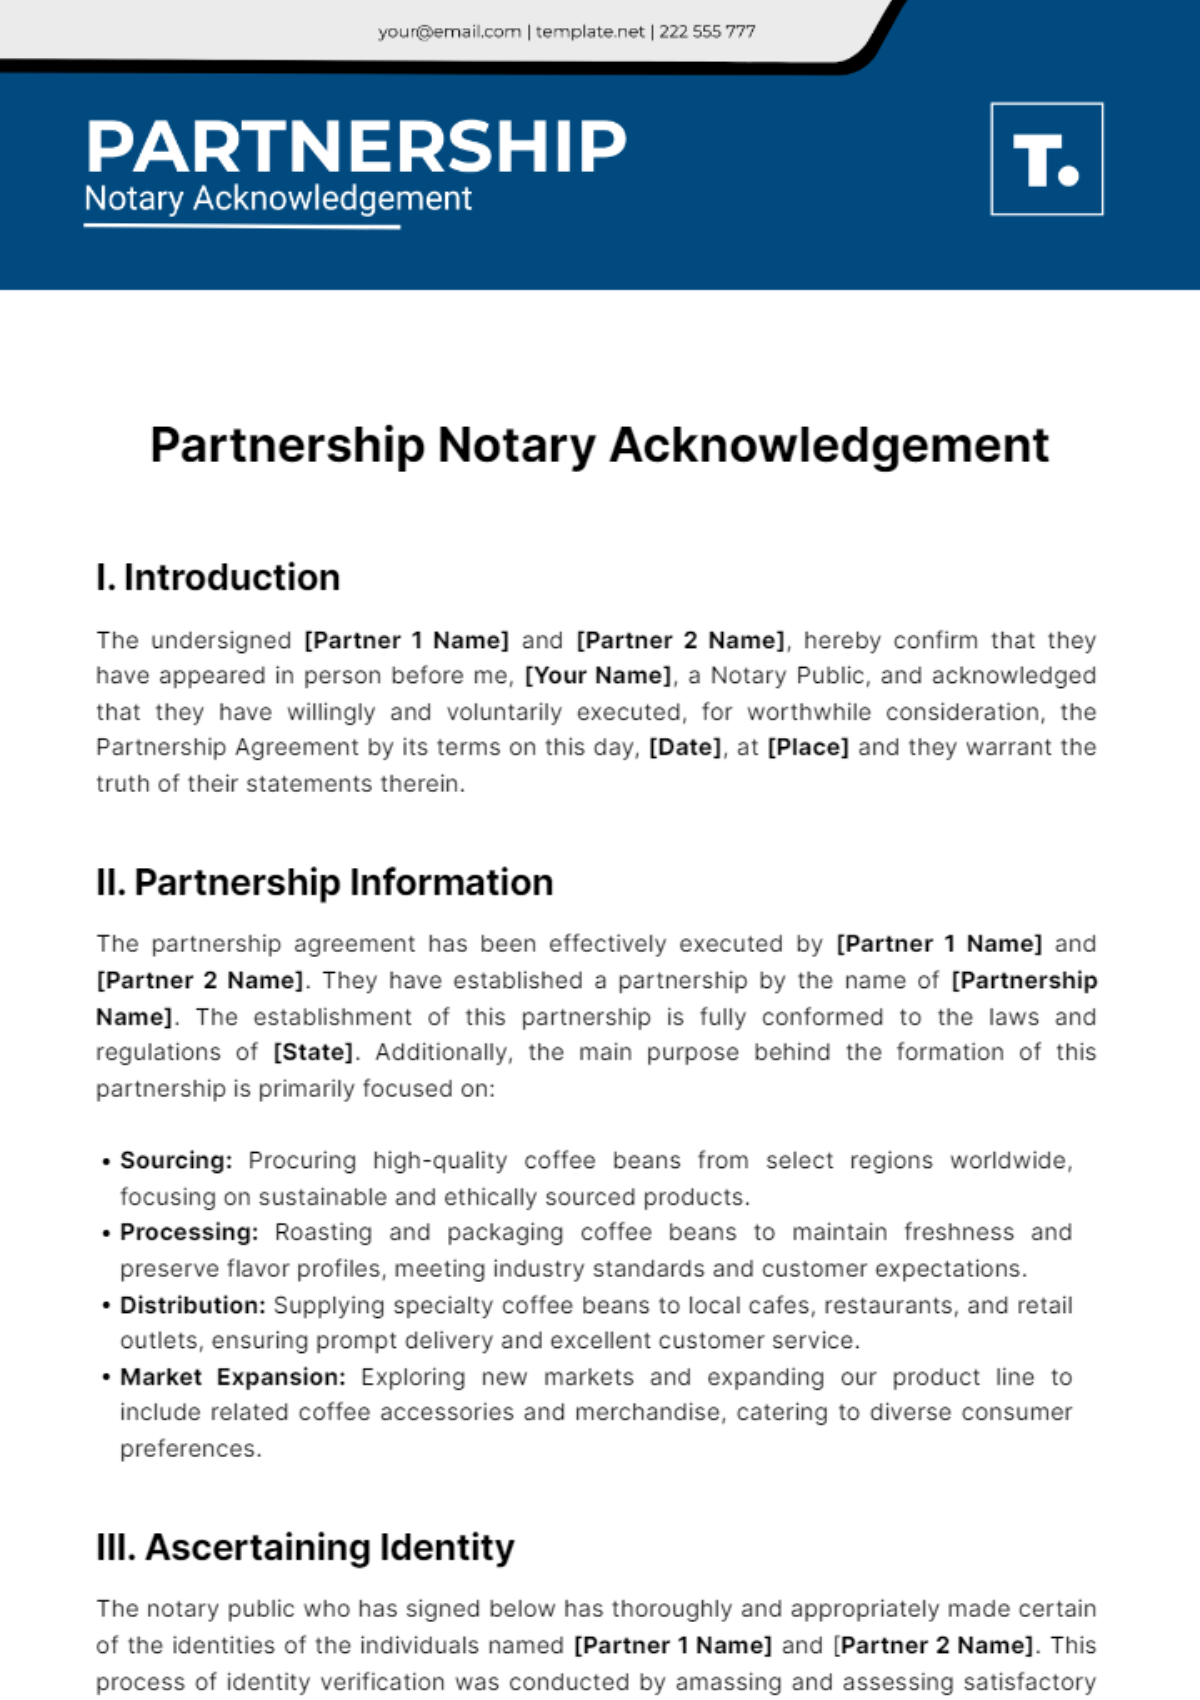 Free Partnership Notary Acknowledgement Template